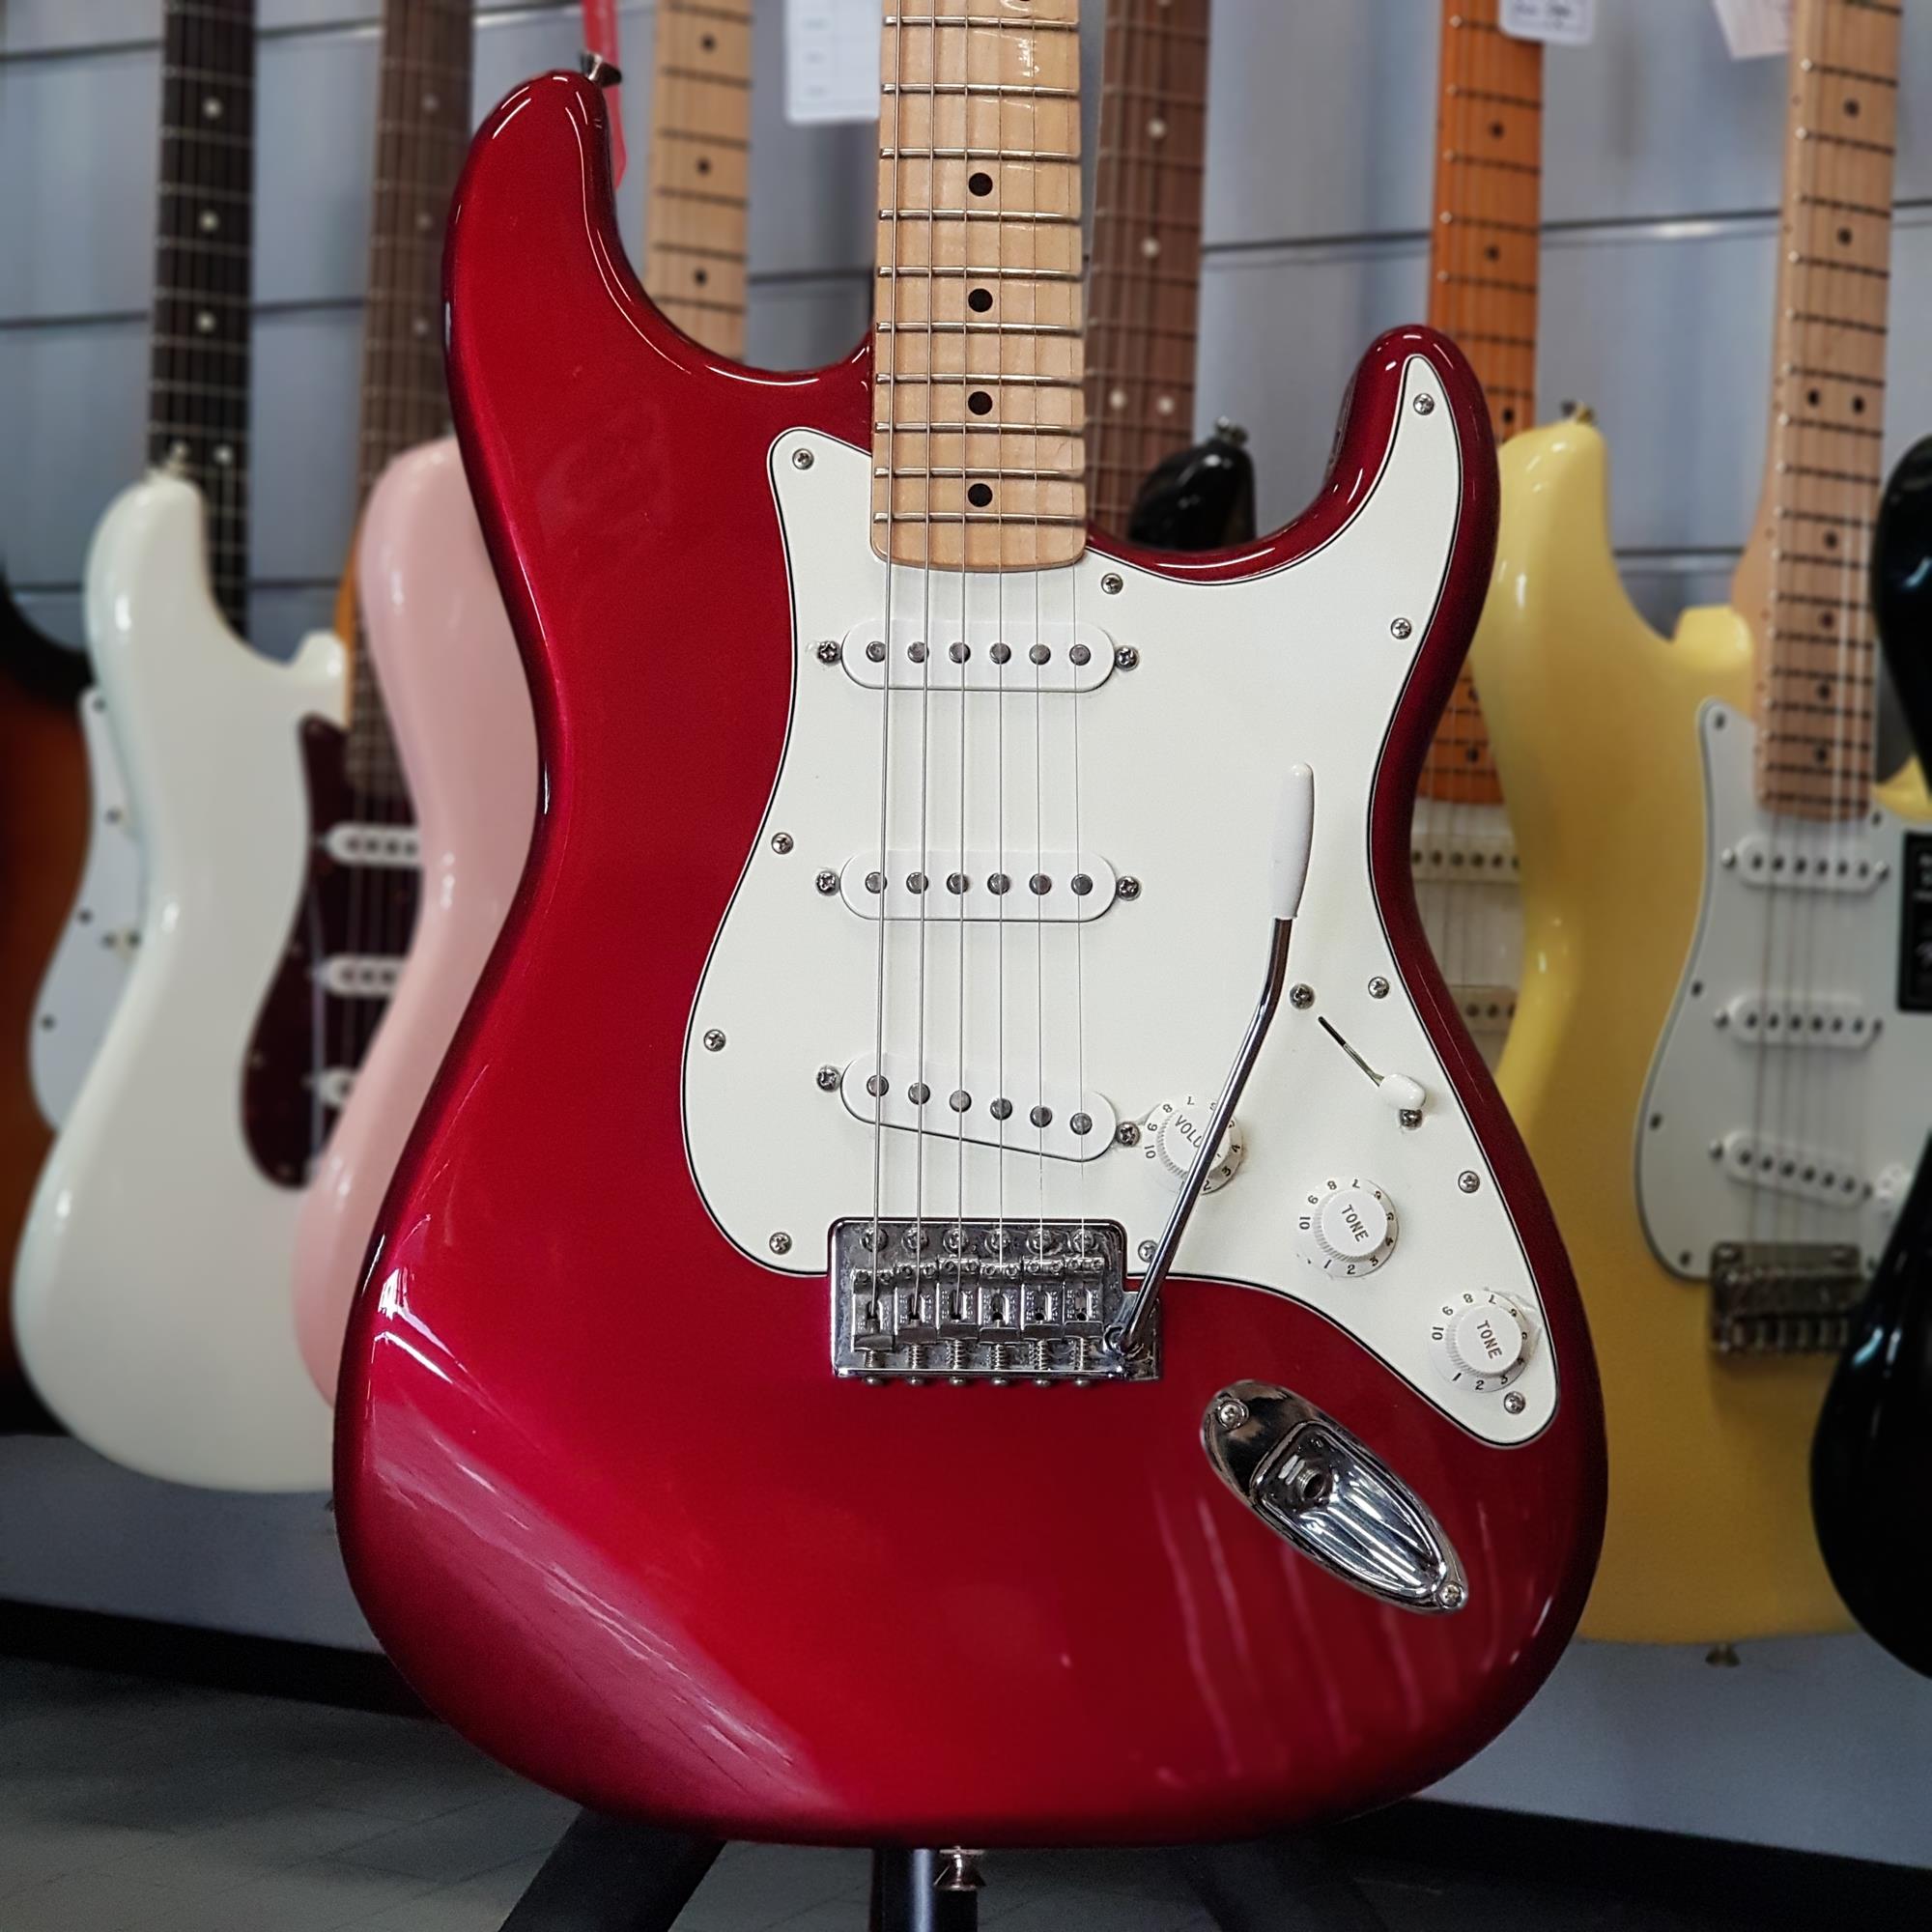 FENDER-STRATOCASTER-MEXICO-STANDARD-CANDY-APPLE-RED-MN-sku-1659781016170